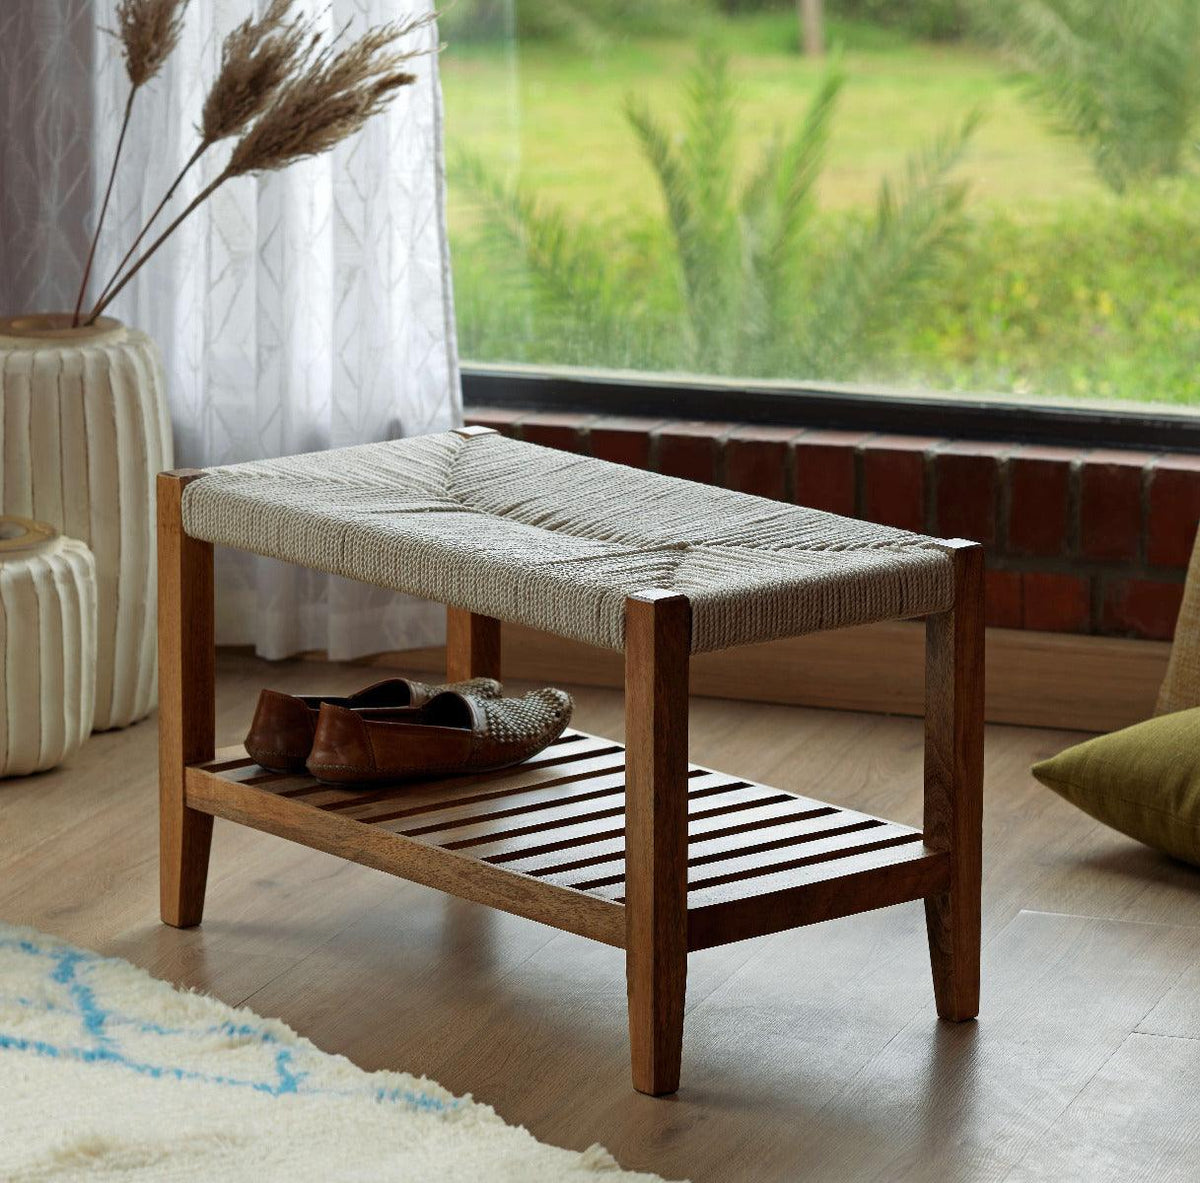 Twine Wooden Bench with Rack (White) - ellementry